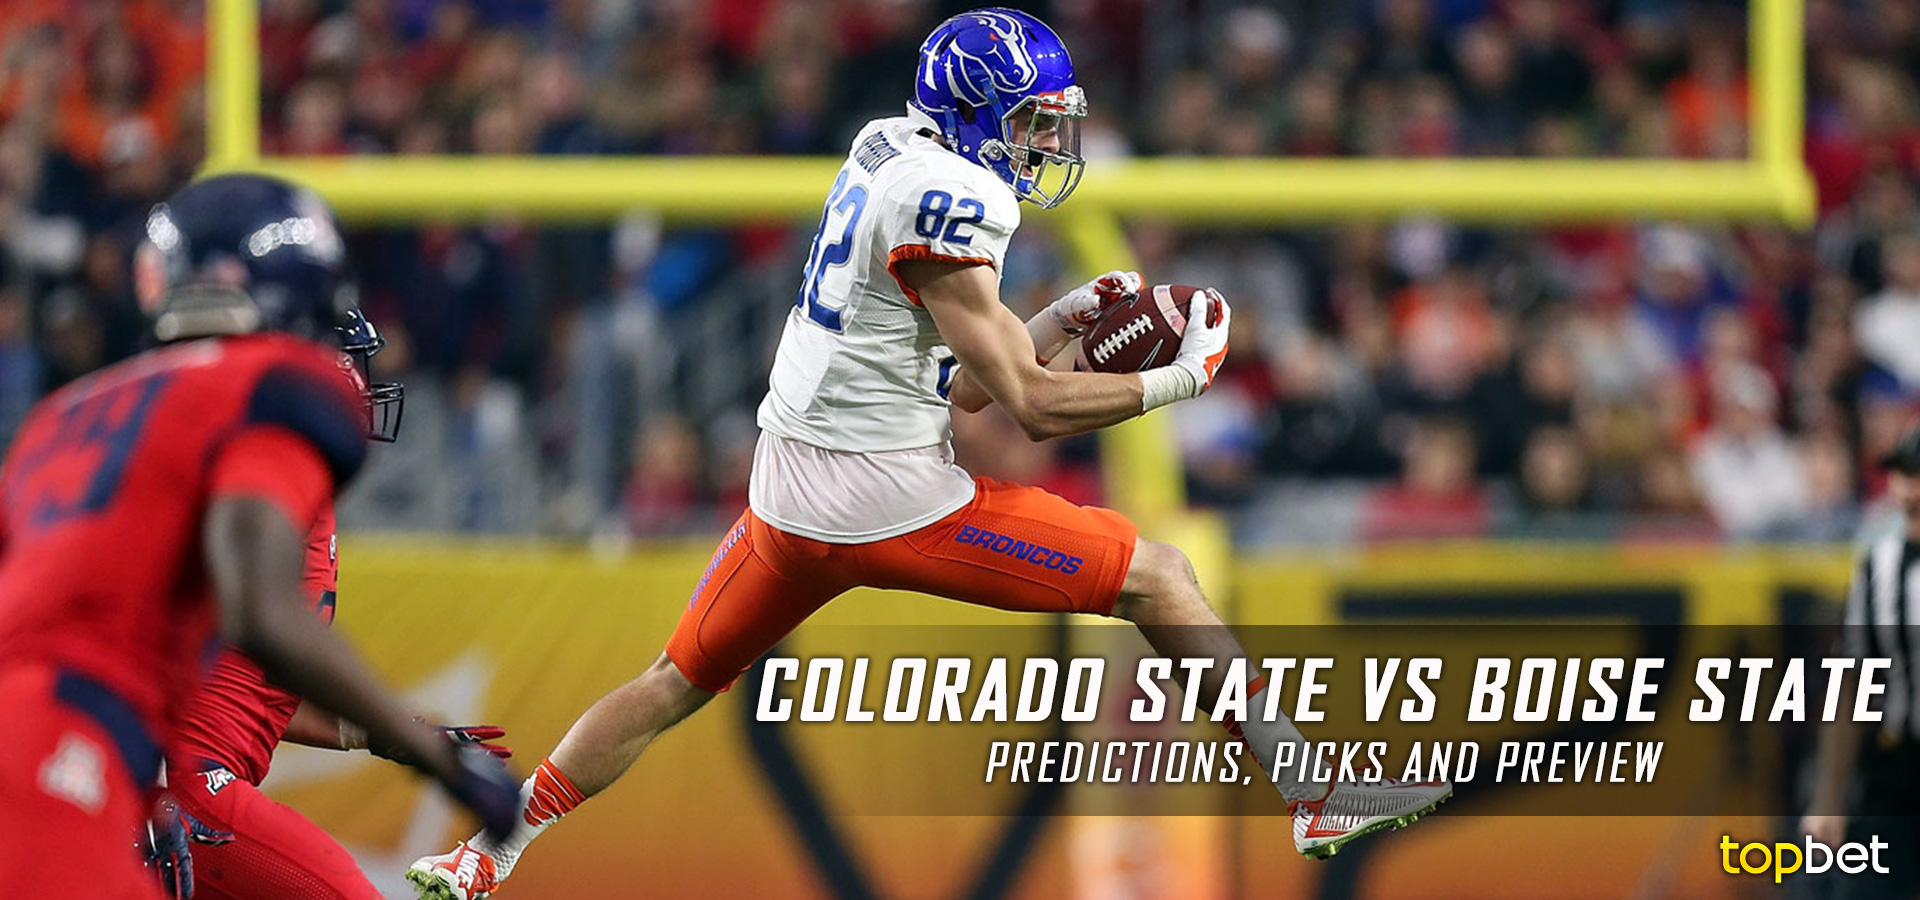 Colorado State vs Boise State Football Predictions and Picks